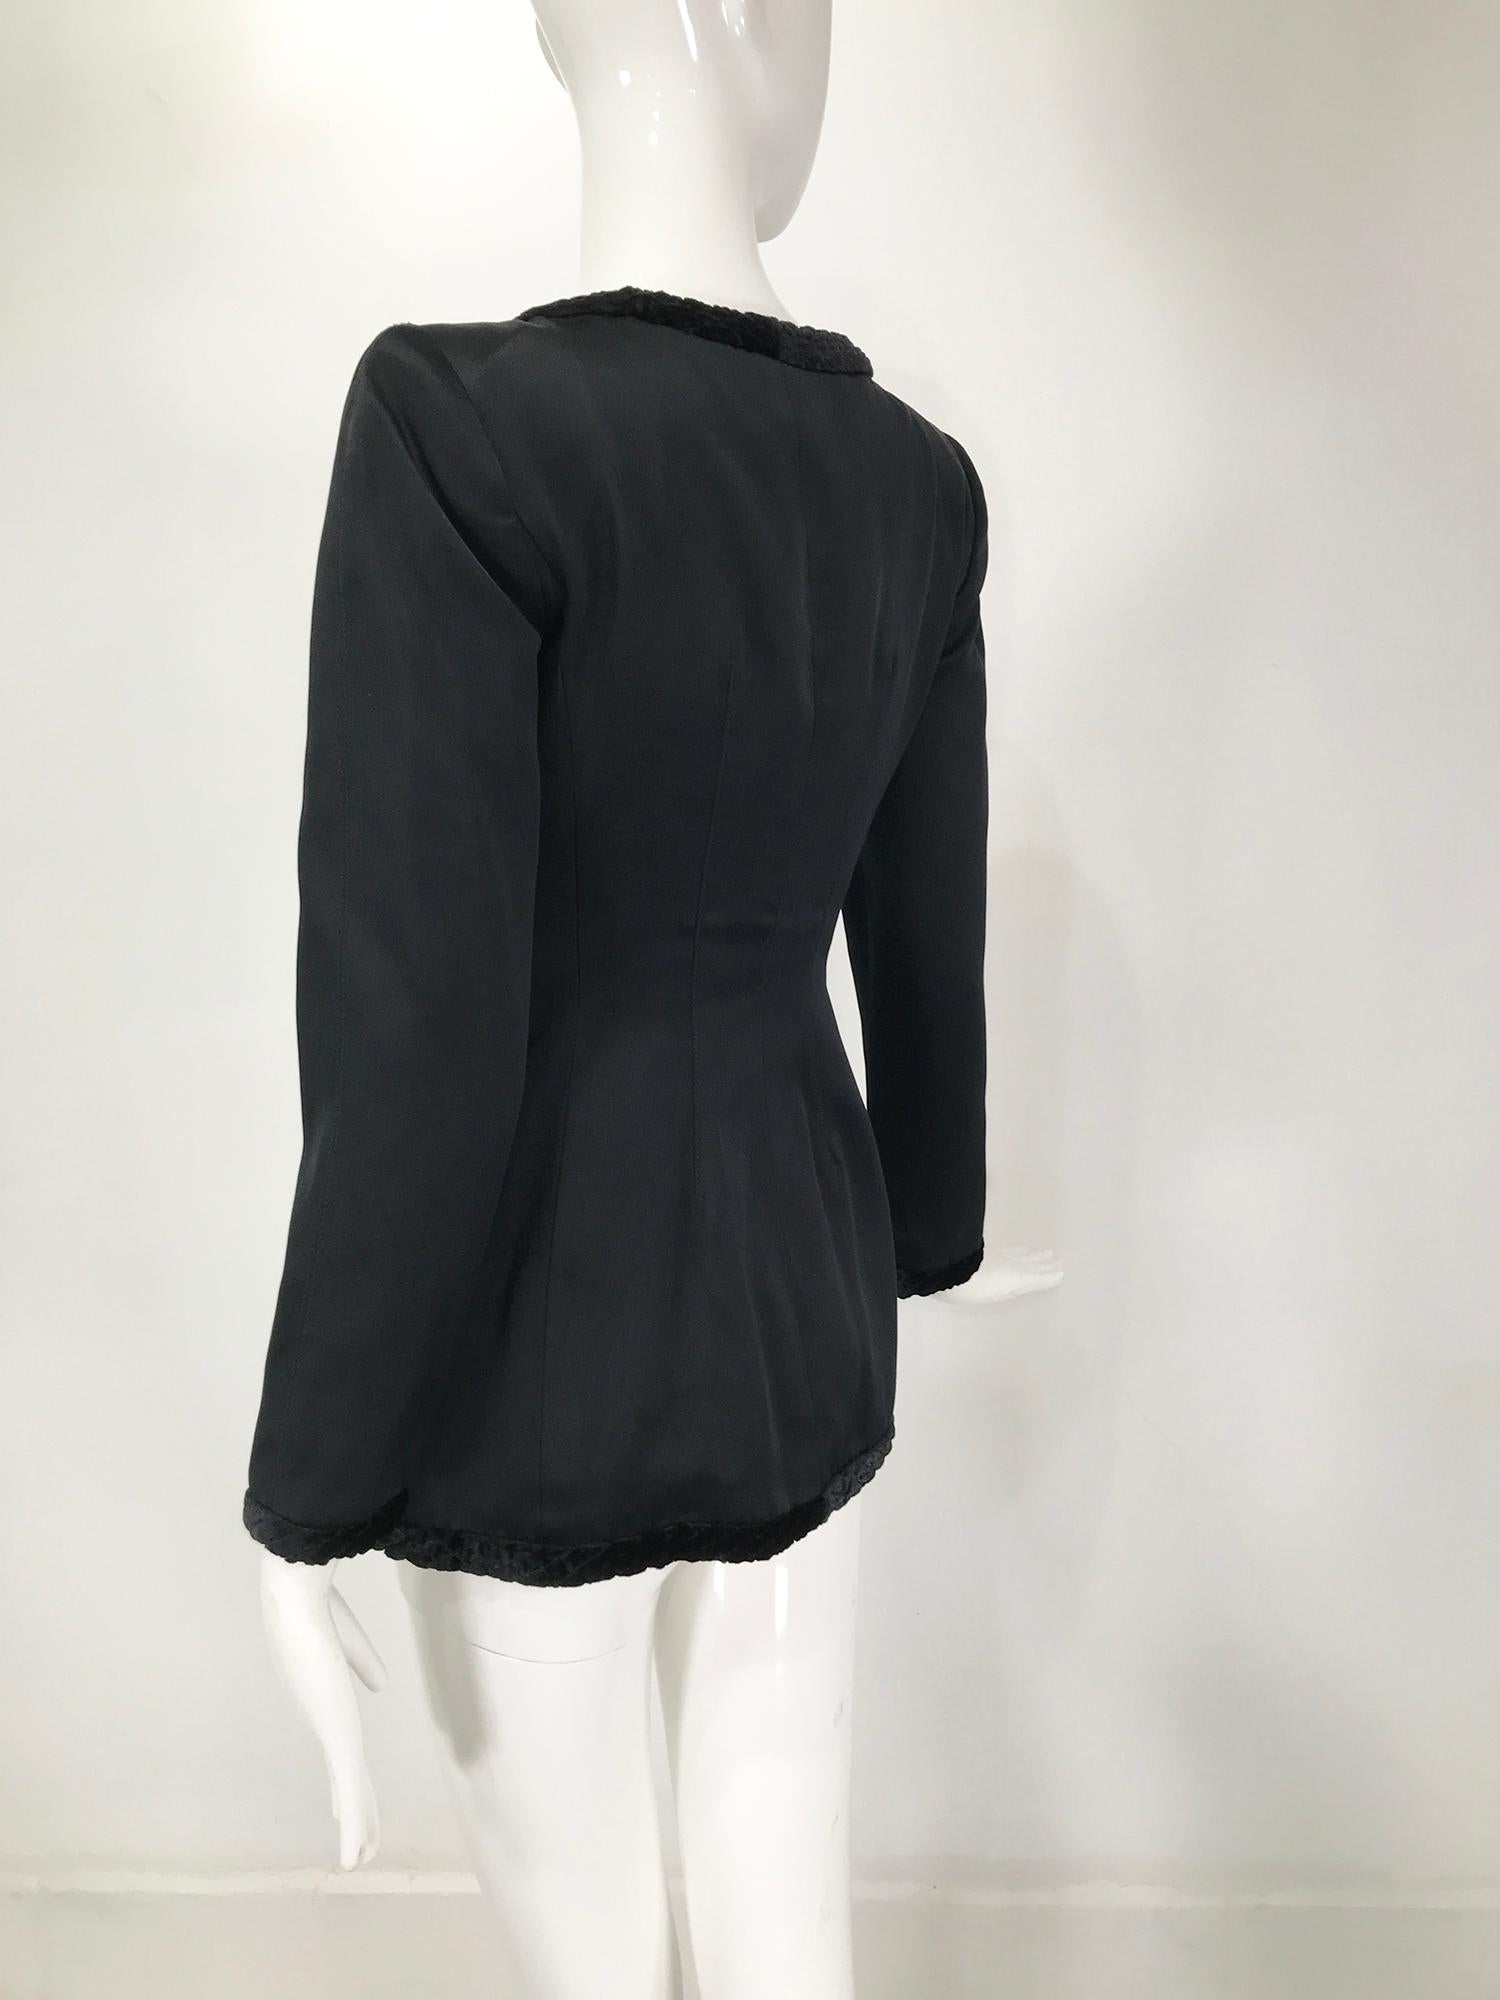 Valentino Black Silk Fitted Jewel Button Evening Jacket 1990s For Sale 1